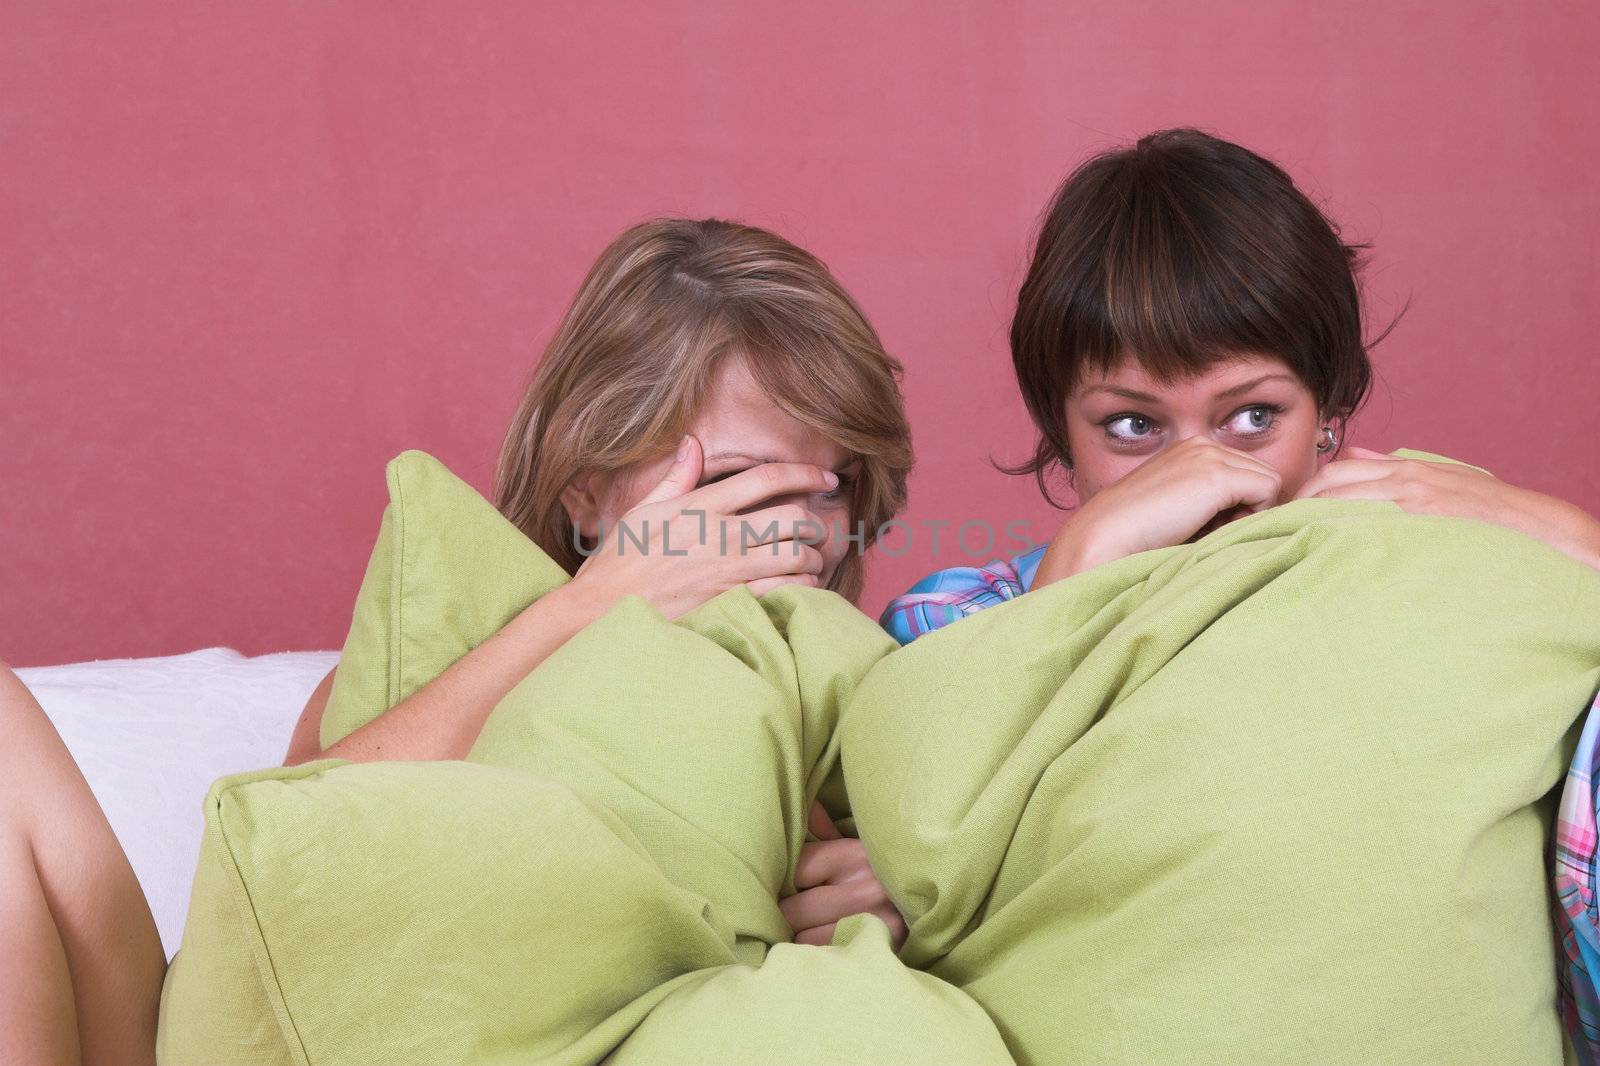 Two girls watching a scary movie together, hiding behind their hands